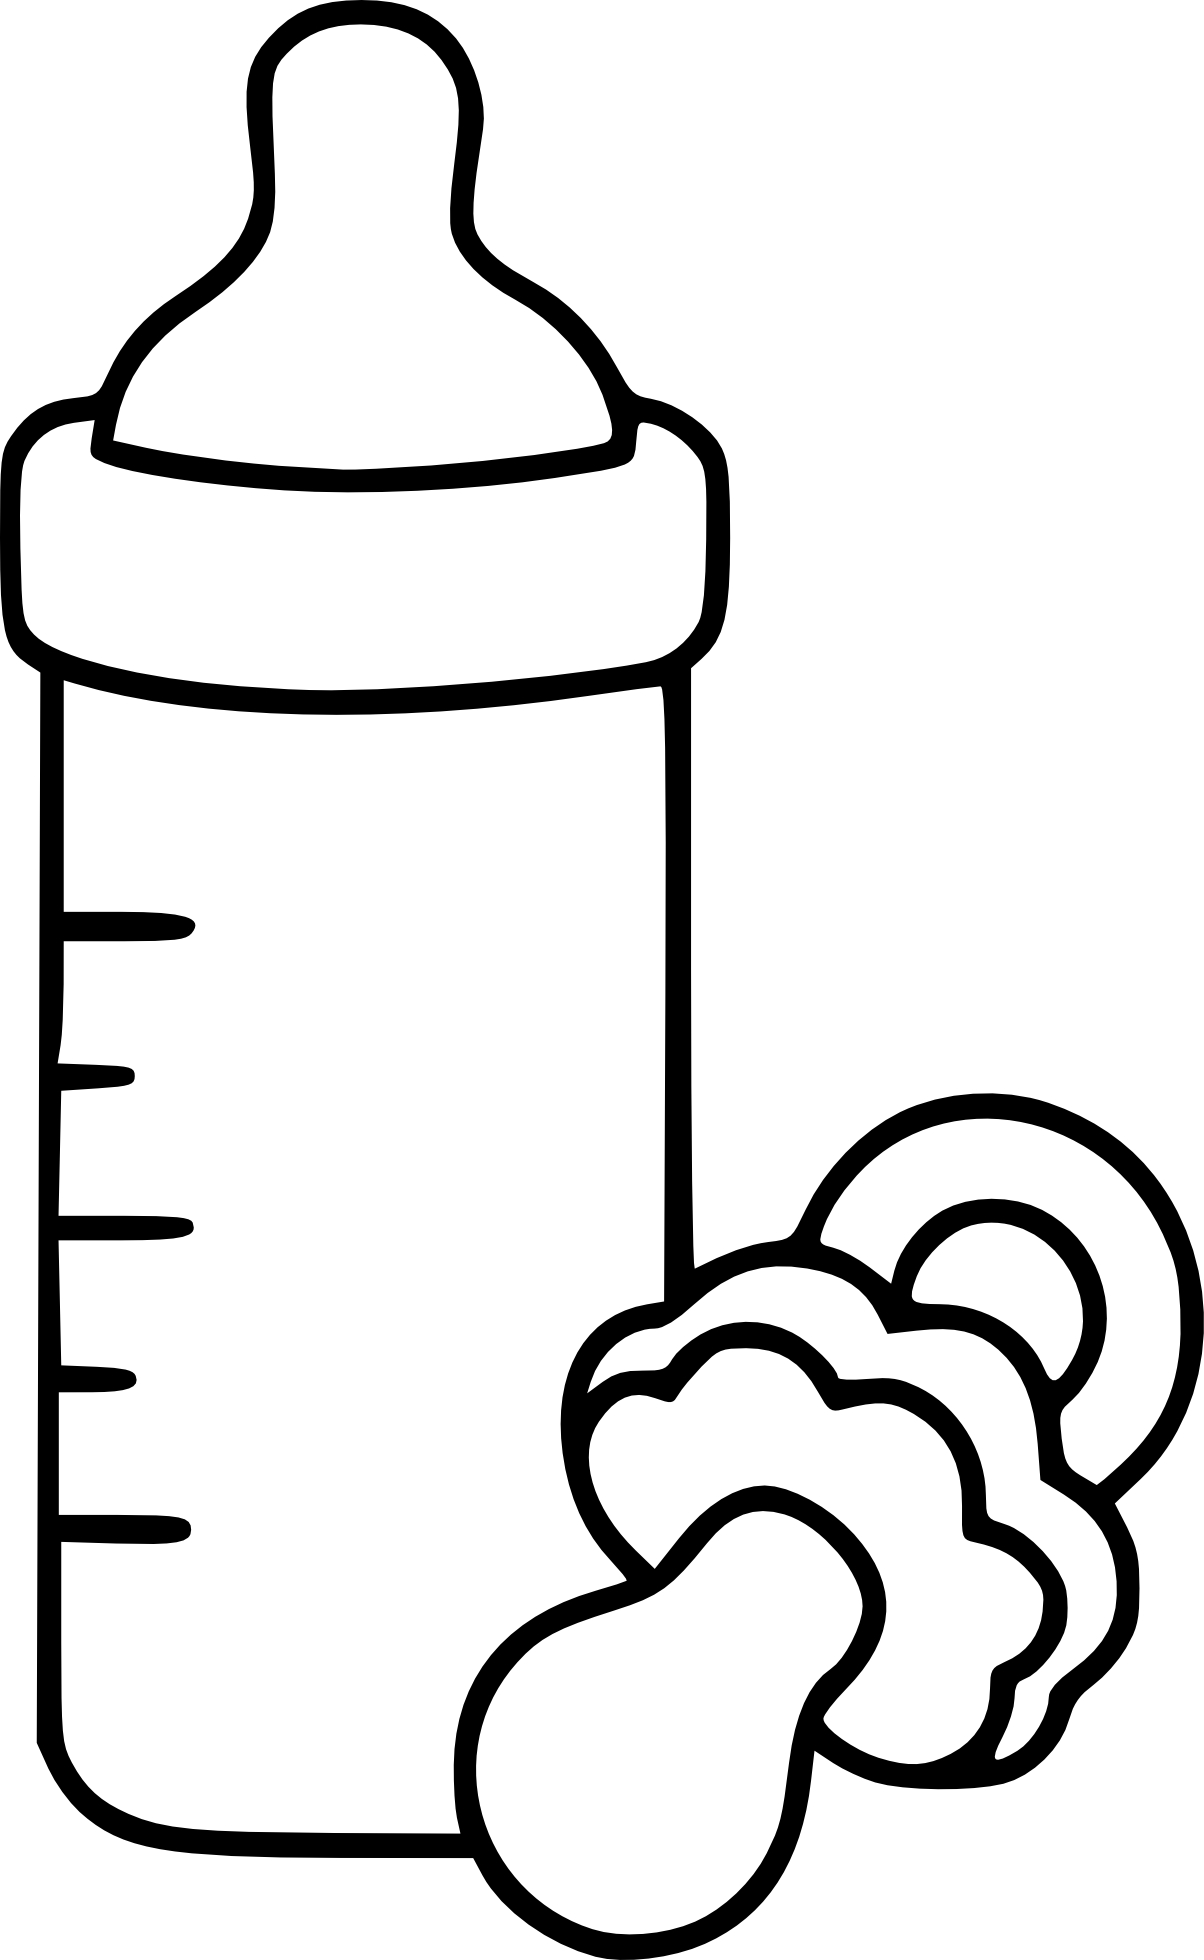 Bottle coloring page